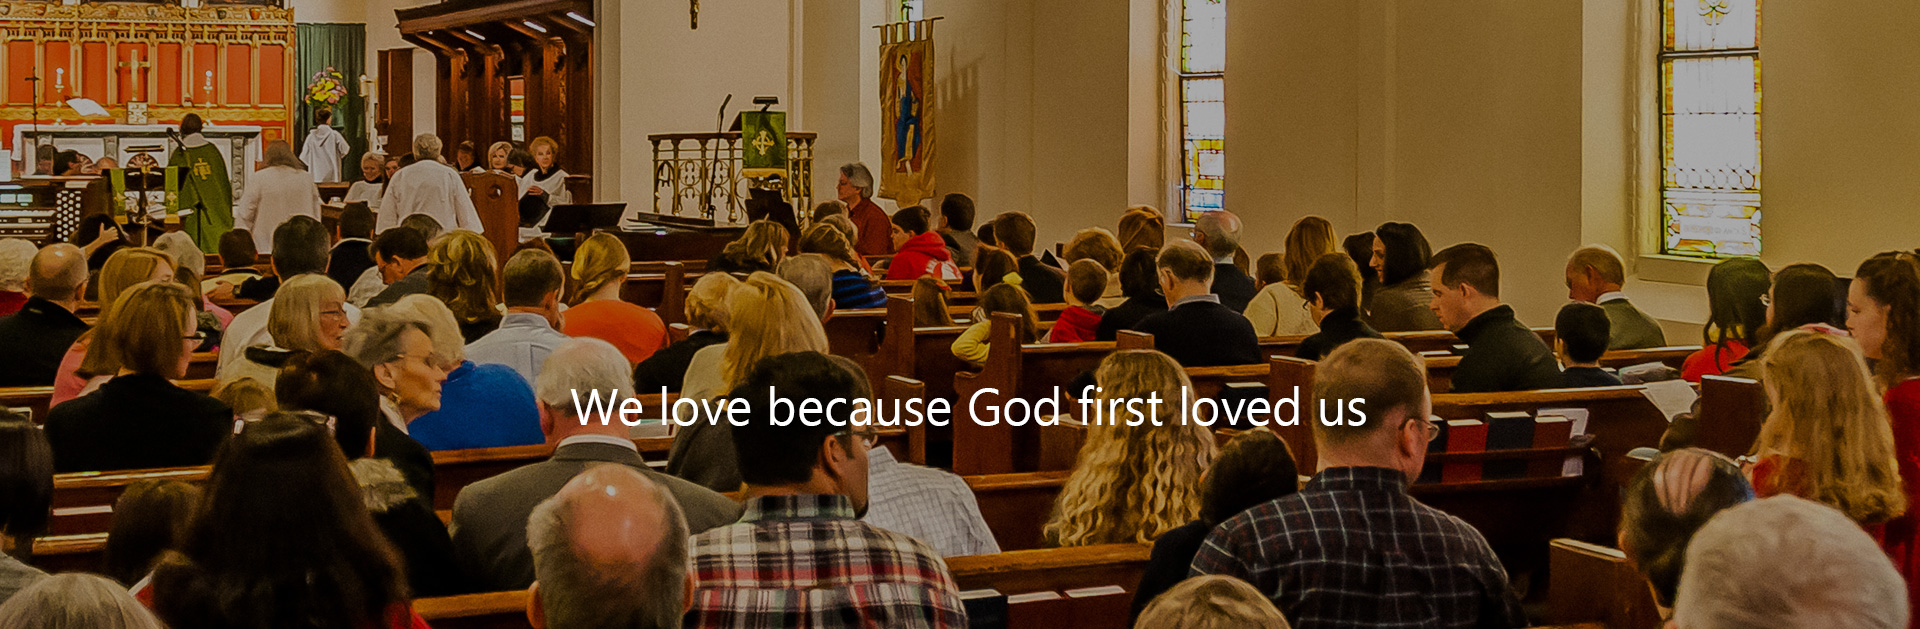 We love because God first loved us